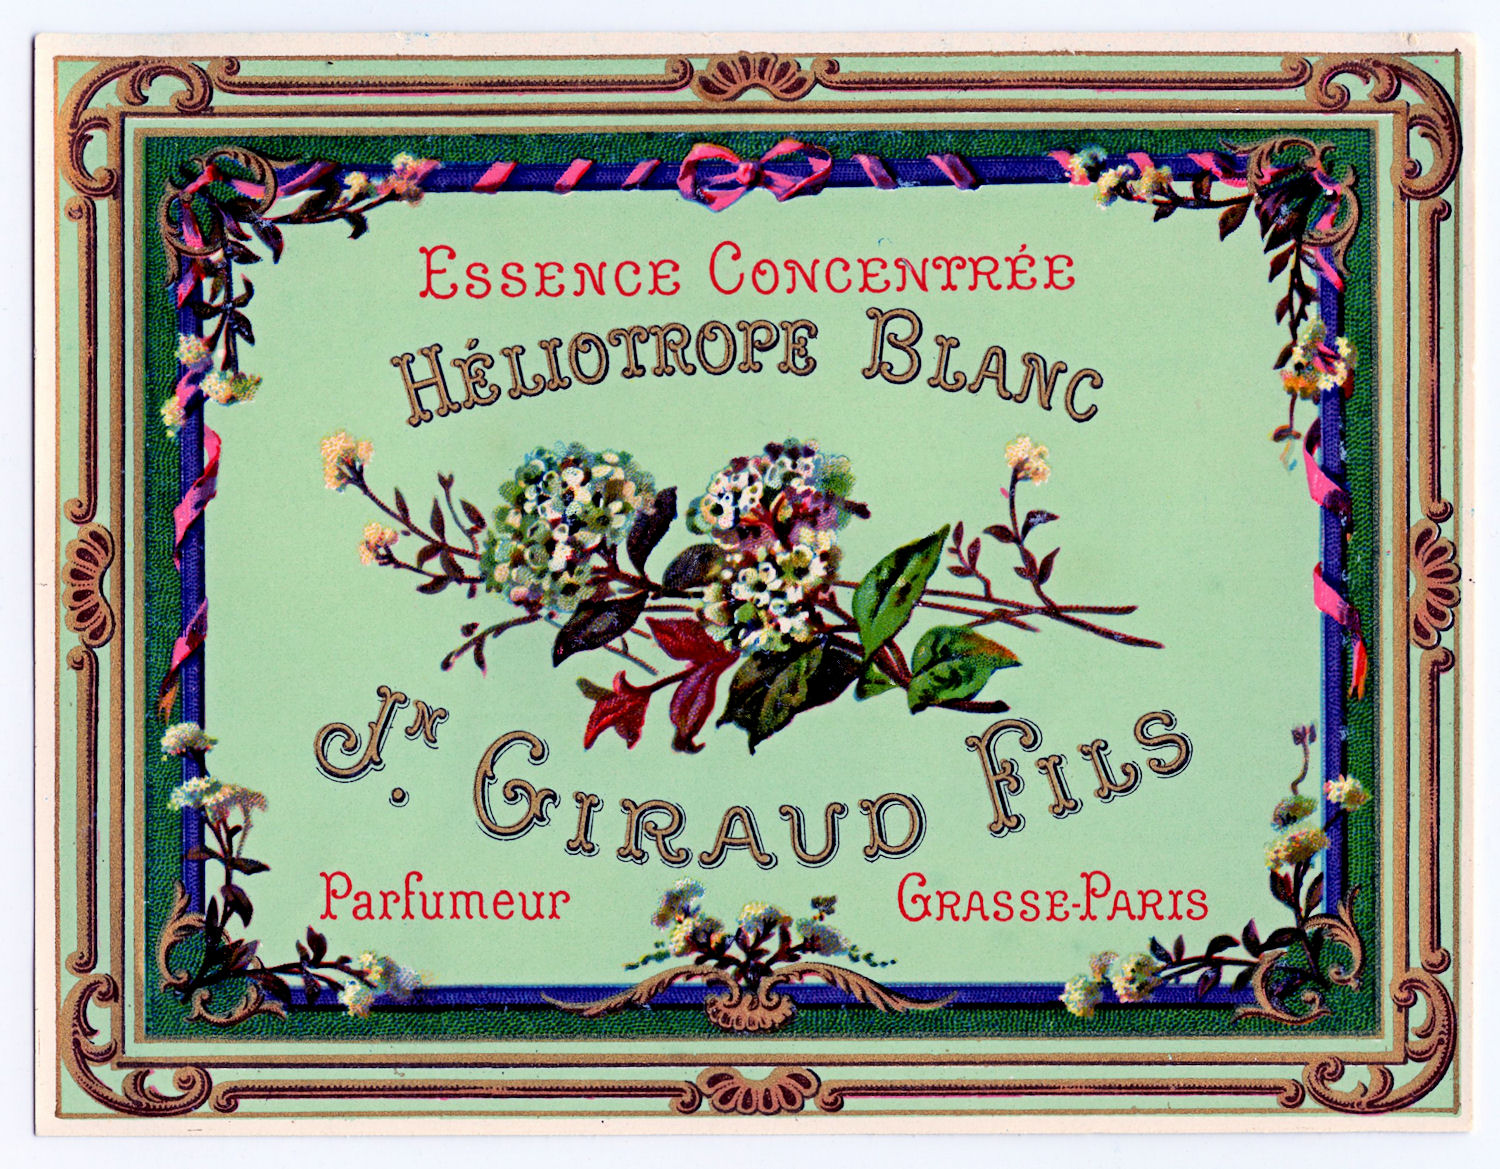     The Colors In This Pretty French Perfume Label  I Hope You Do Too